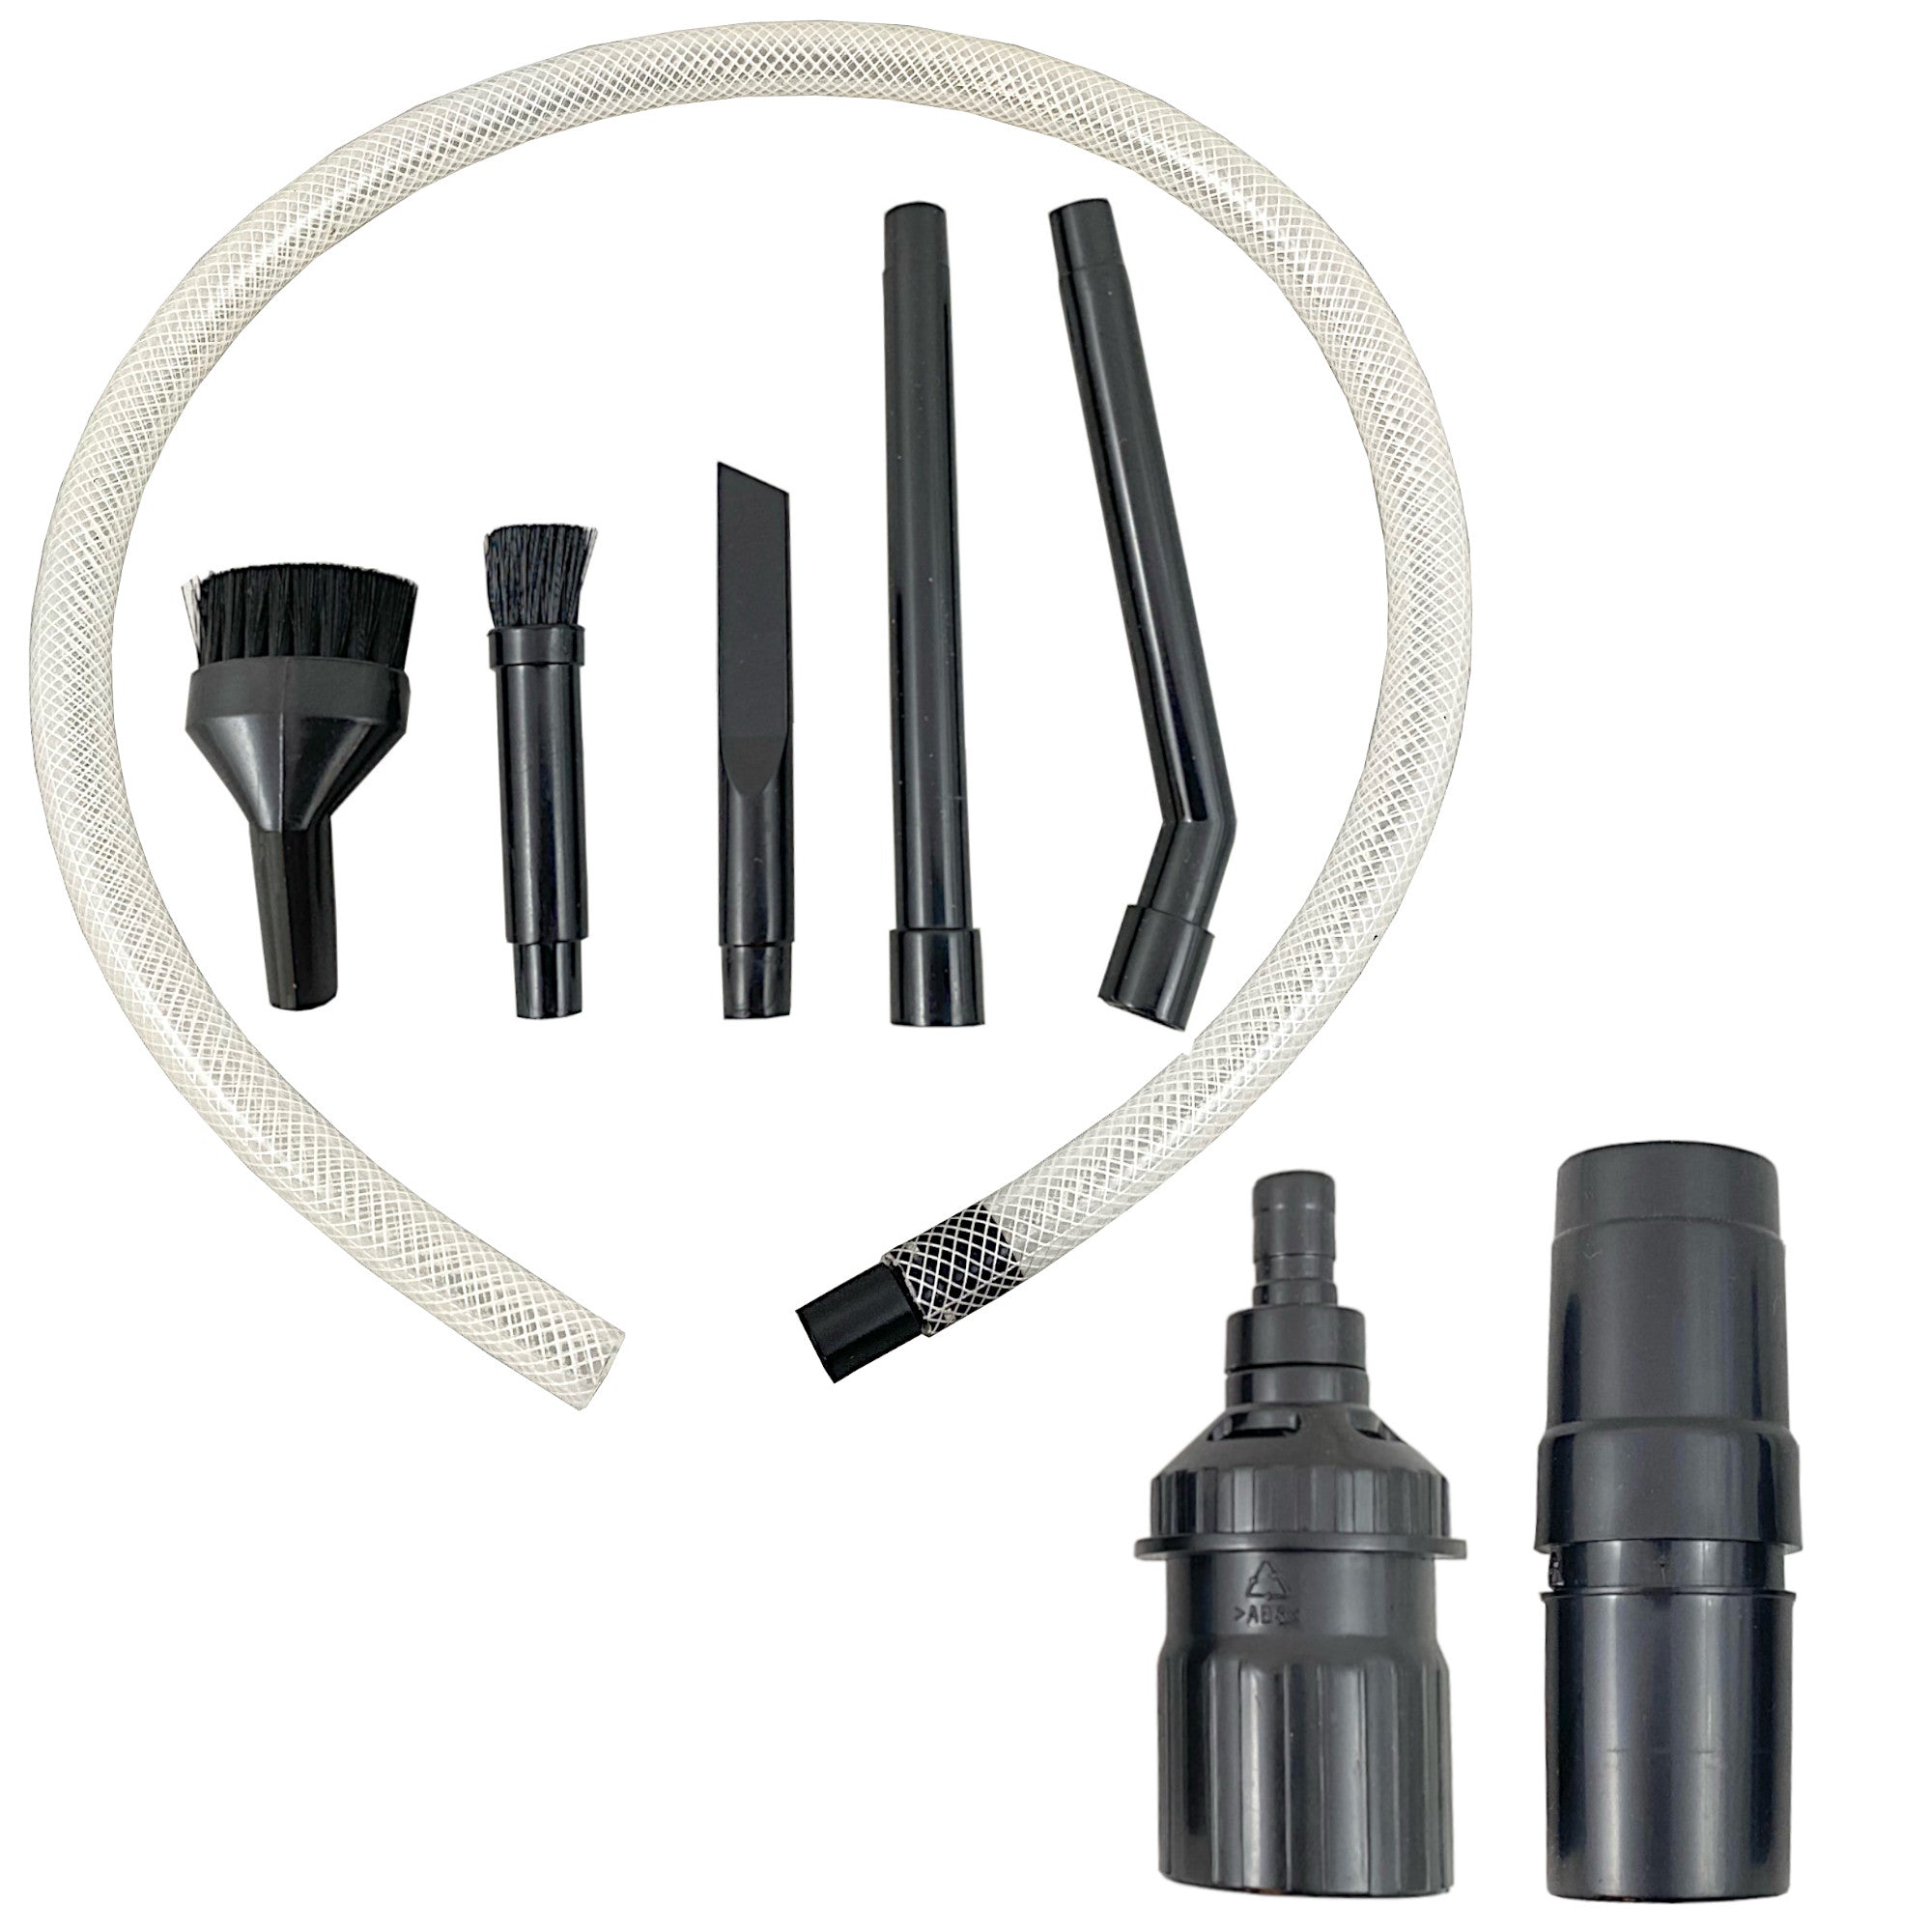 Micro-tool Adapter Kit for Vacuums